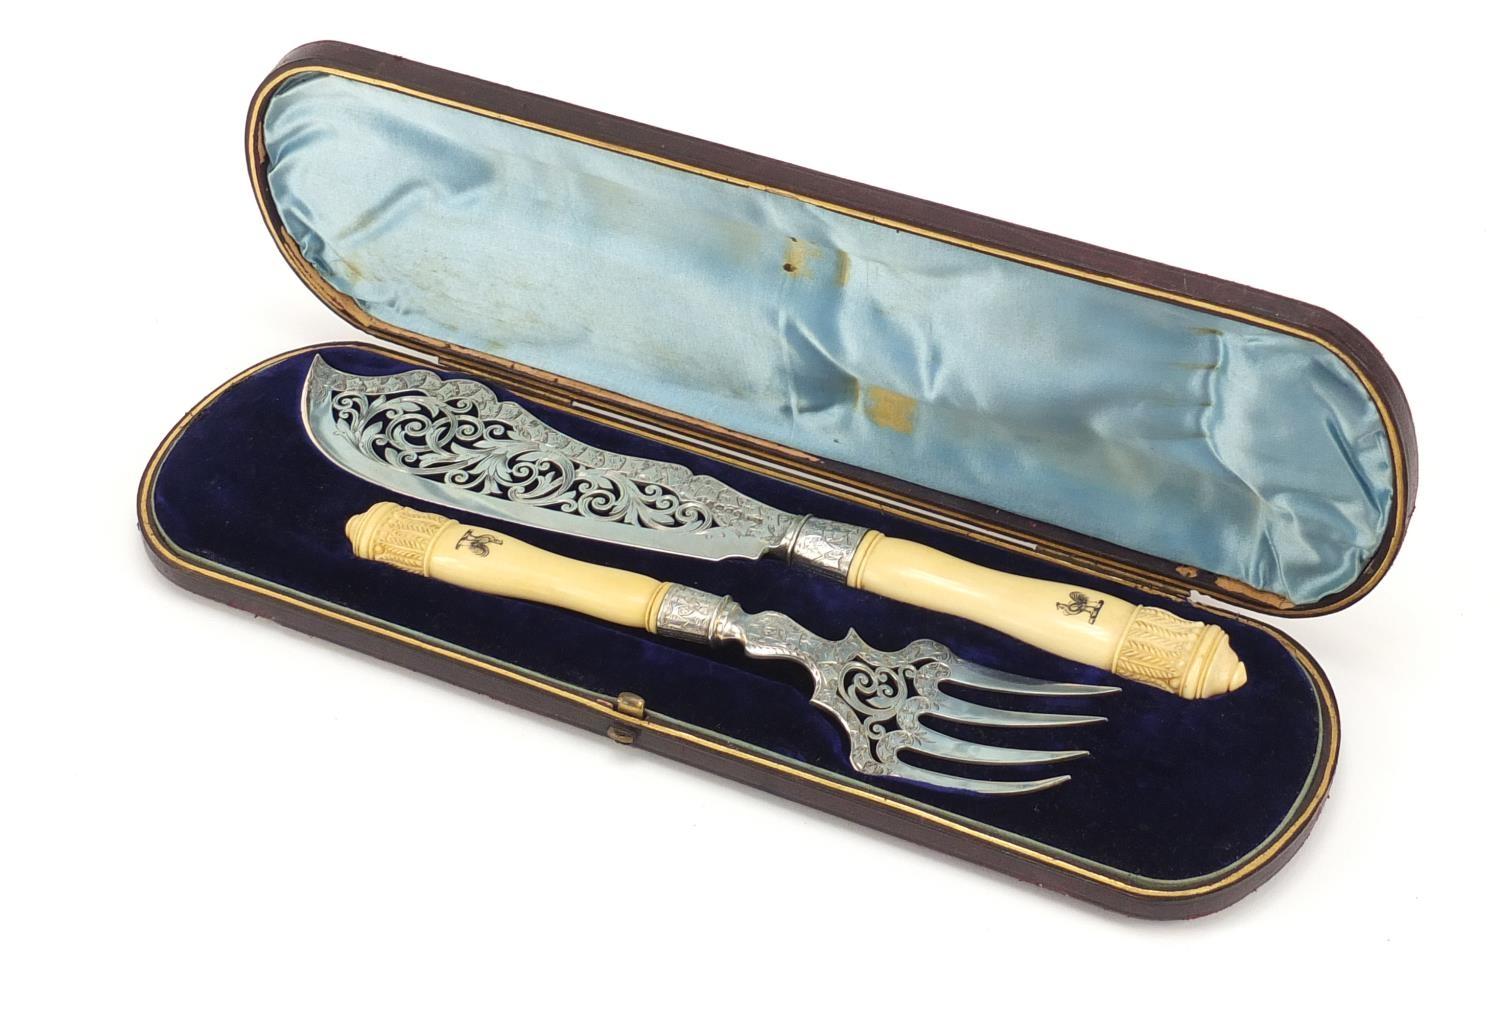 Victorian silver and ivory fish servers by George Unite, Birmingham 1884, 29cm in length, housed